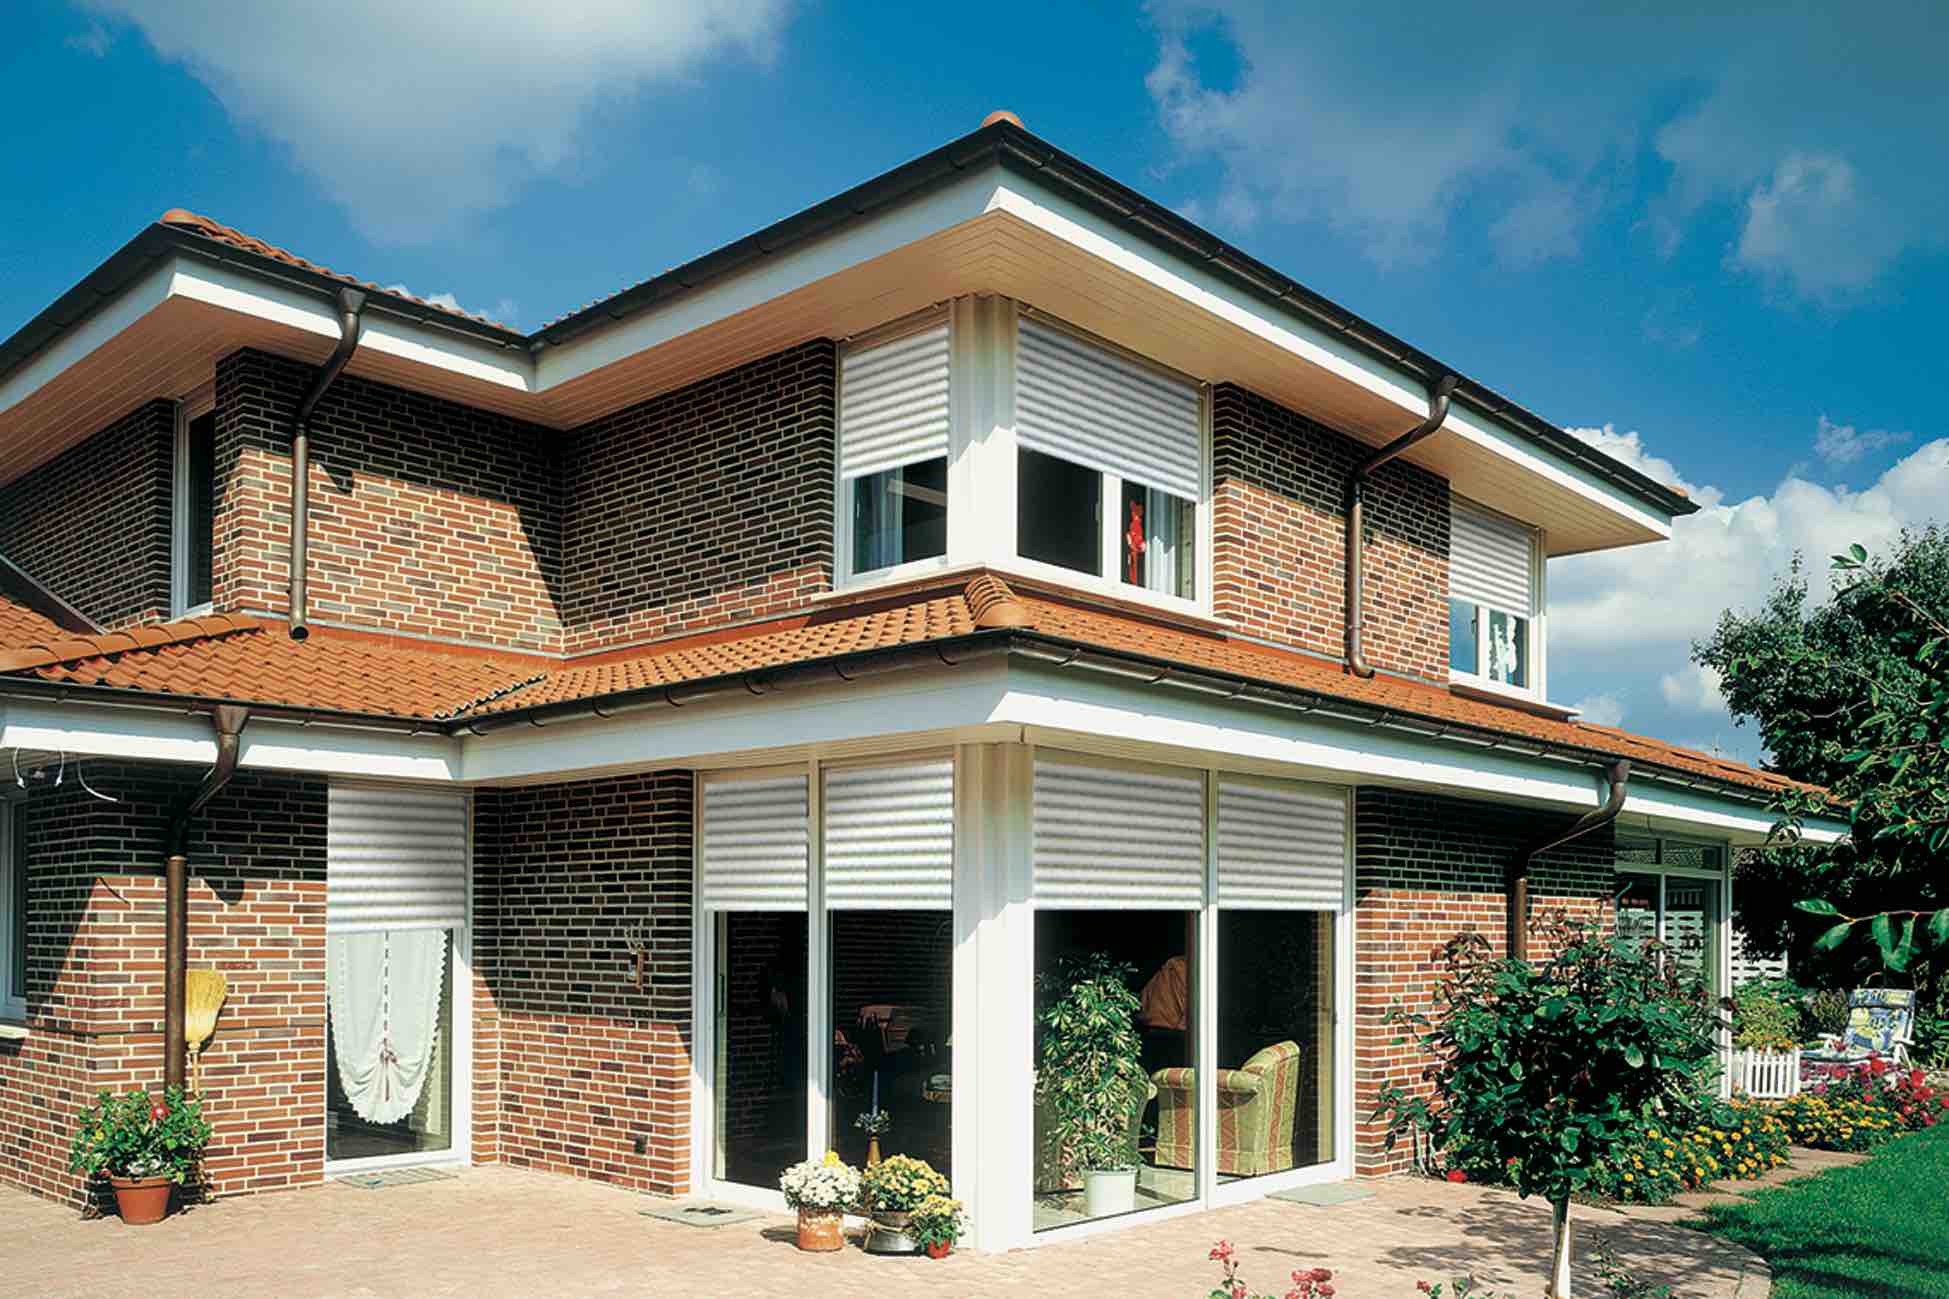 A lovely home in Thailand with VEKA uPVC windows and doors.